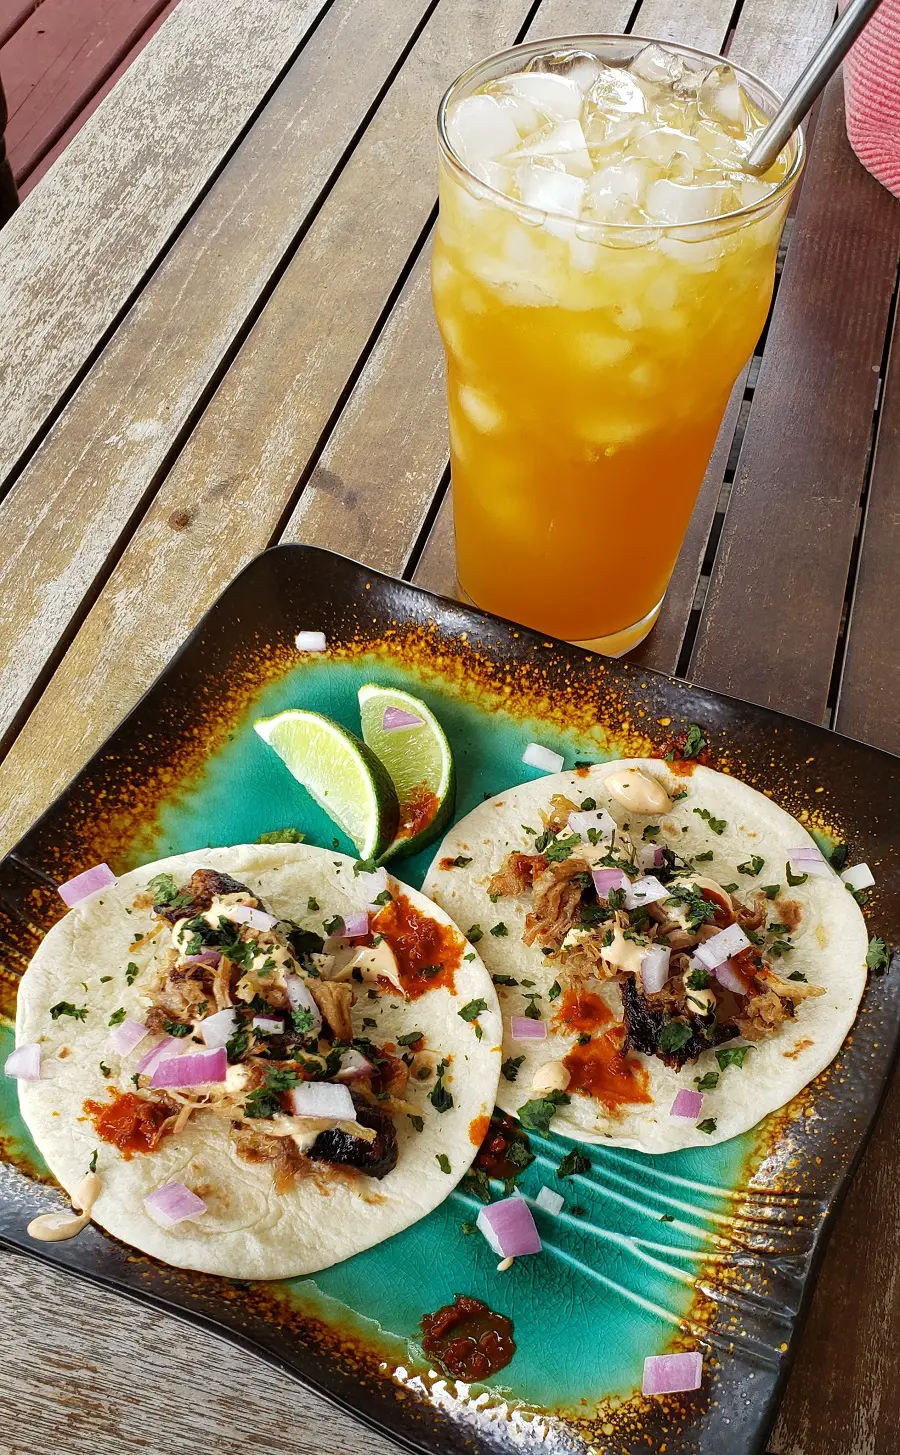 Food Truck-Style Pulled Pork Tacos with Creamy Tex-Mex Sauce Recipe